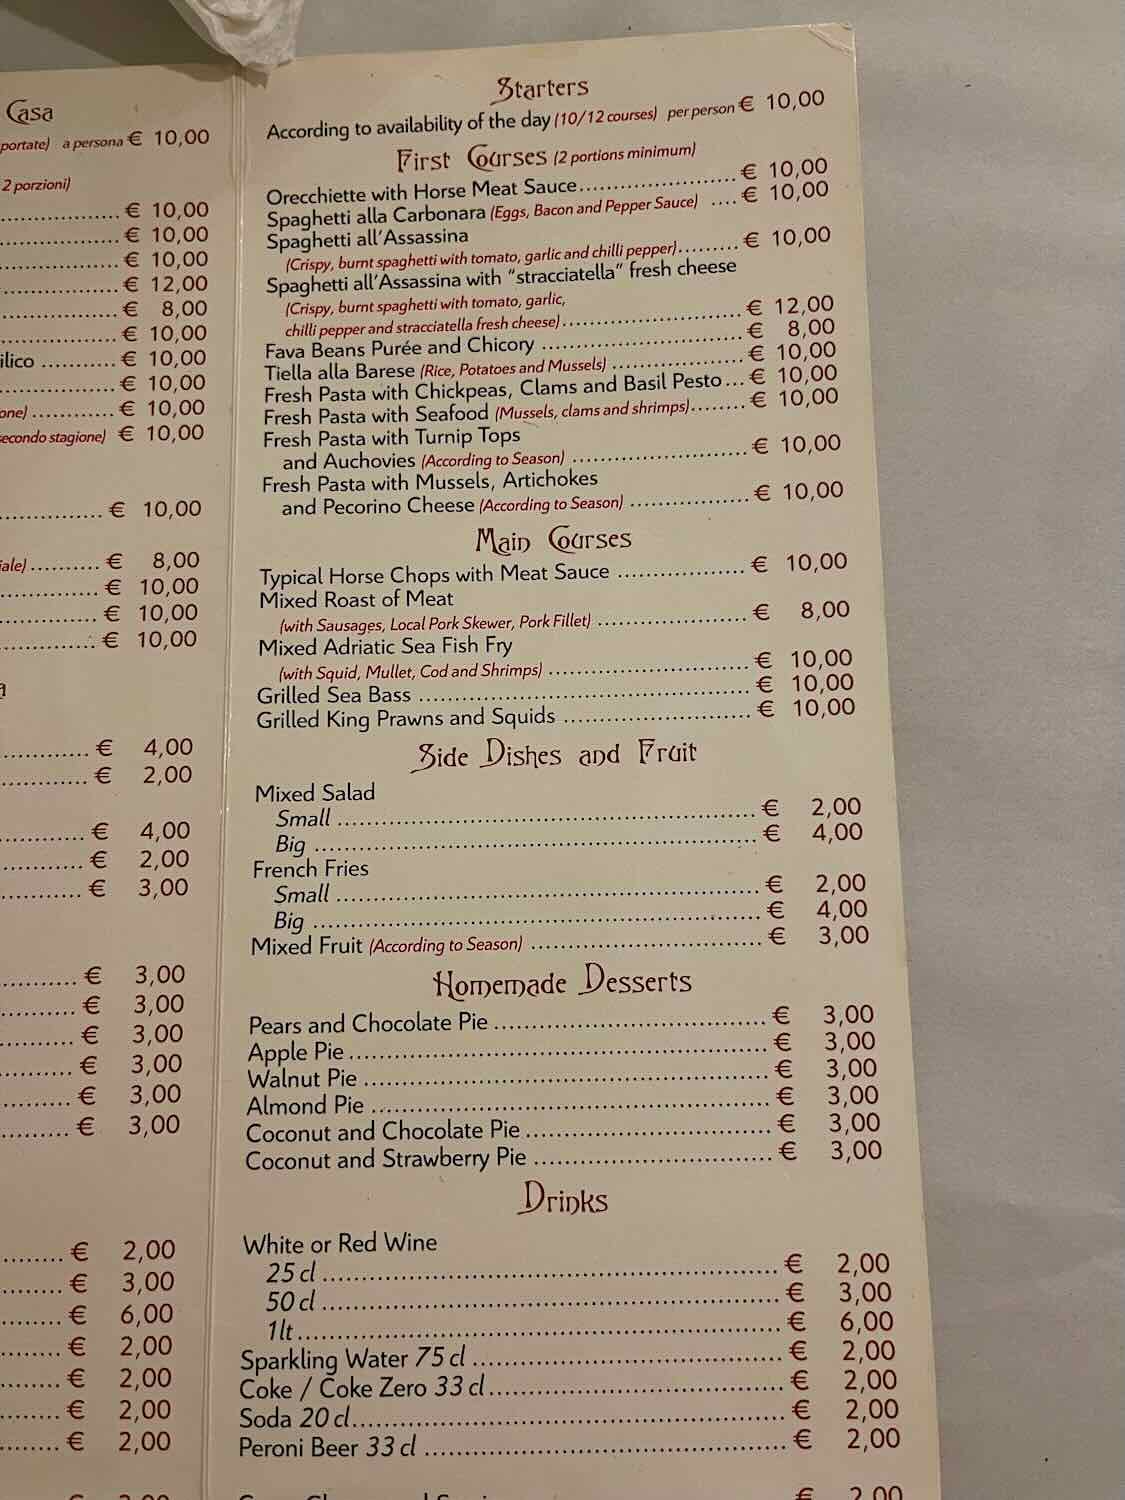 A close-up image of a restaurant menu in Bari, Italy. The menu lists various dishes including starters, first courses, main courses, side dishes and fruit, homemade desserts, and drinks. Prices are listed in Euros.